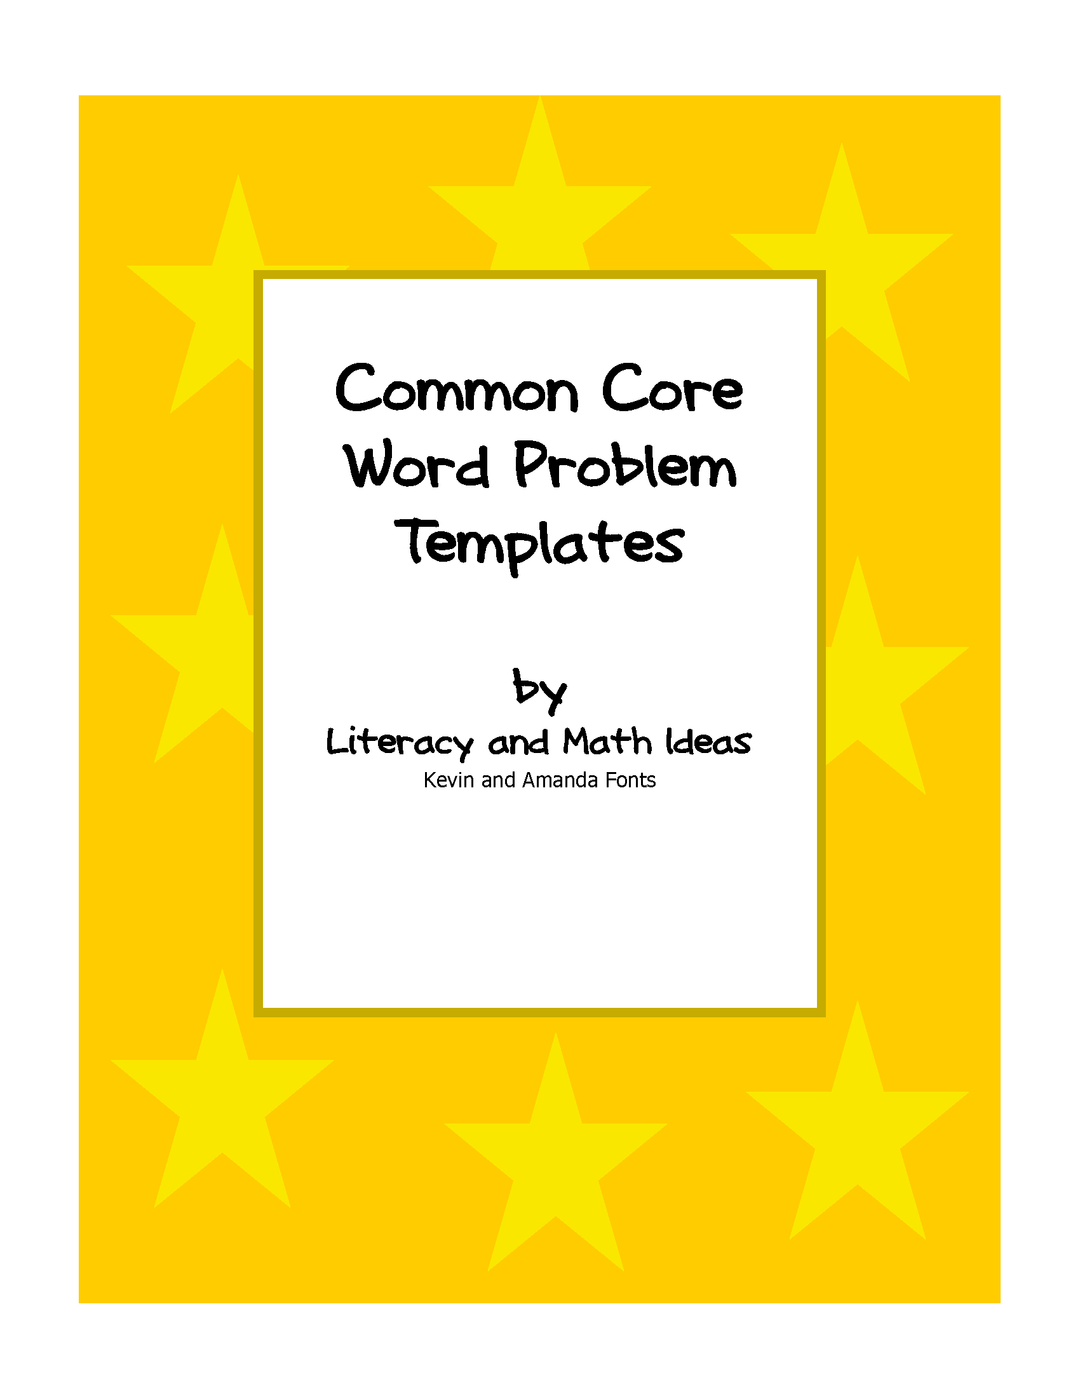 Common Core Word Problem Template Freebie!